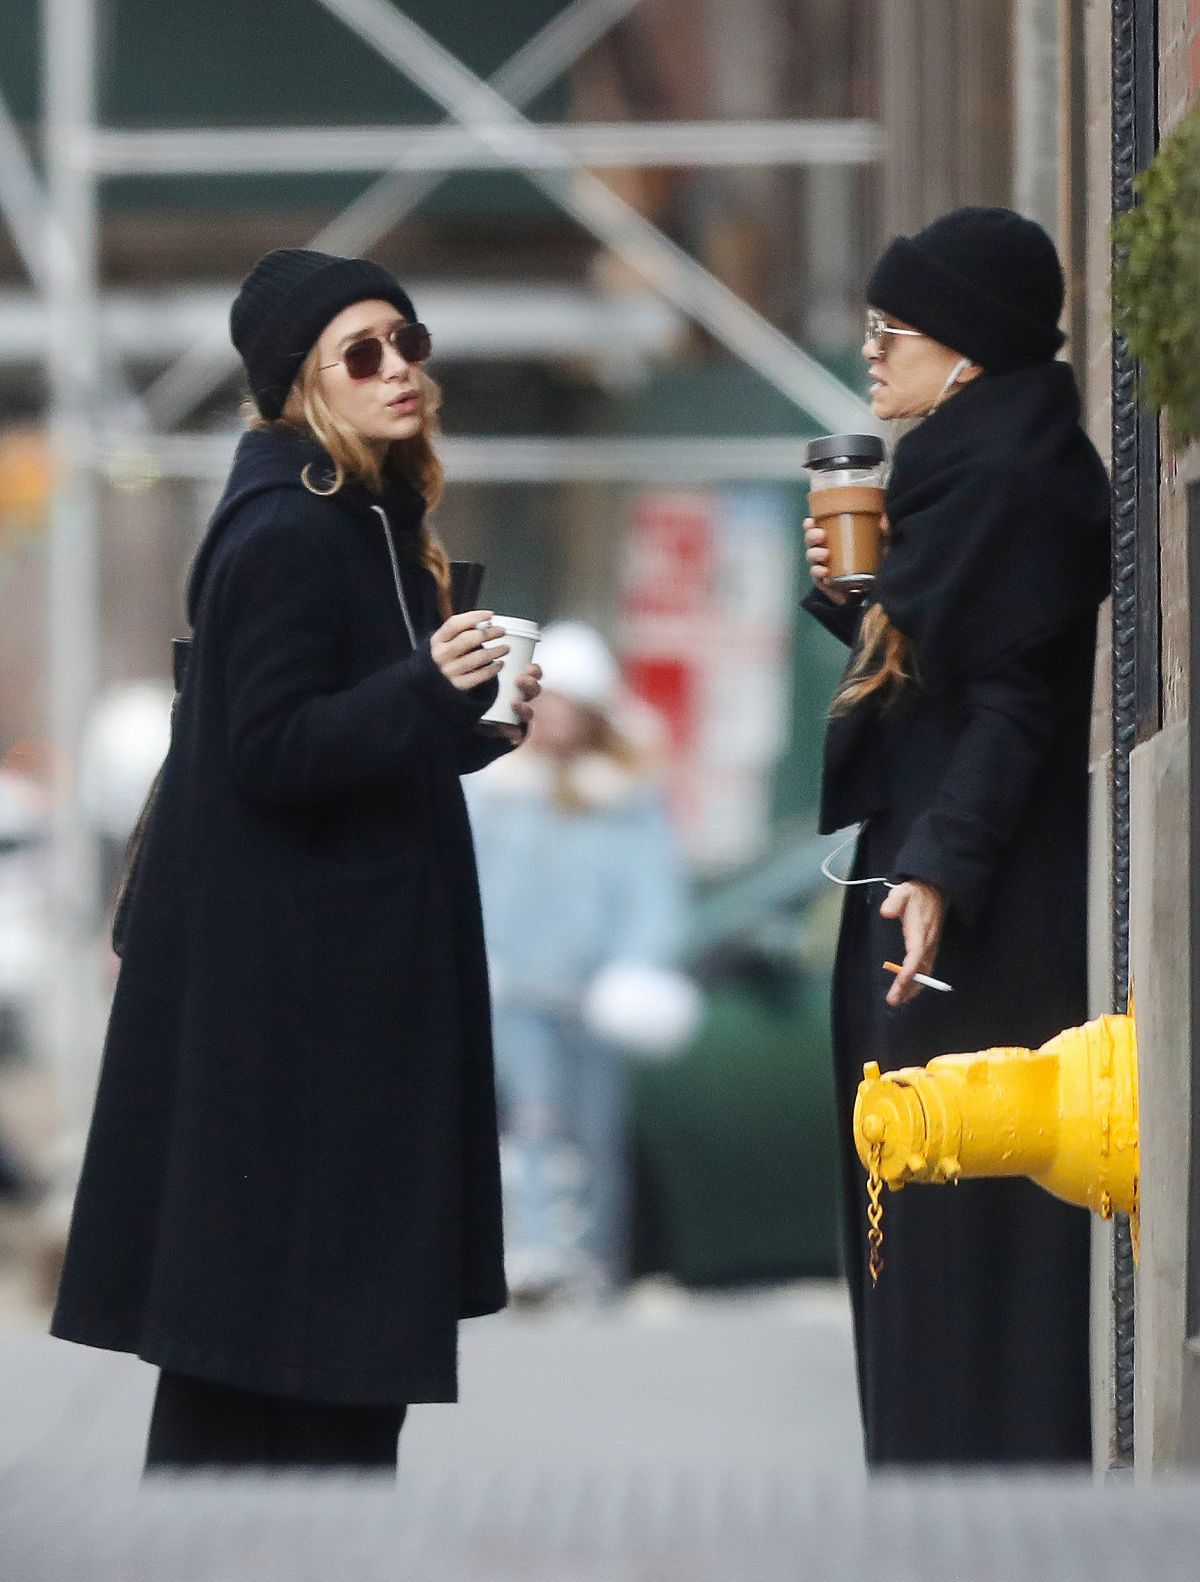 MARY-KATE and ASHLEY OLSEN Out in New York 02/08/2020 – HawtCelebs